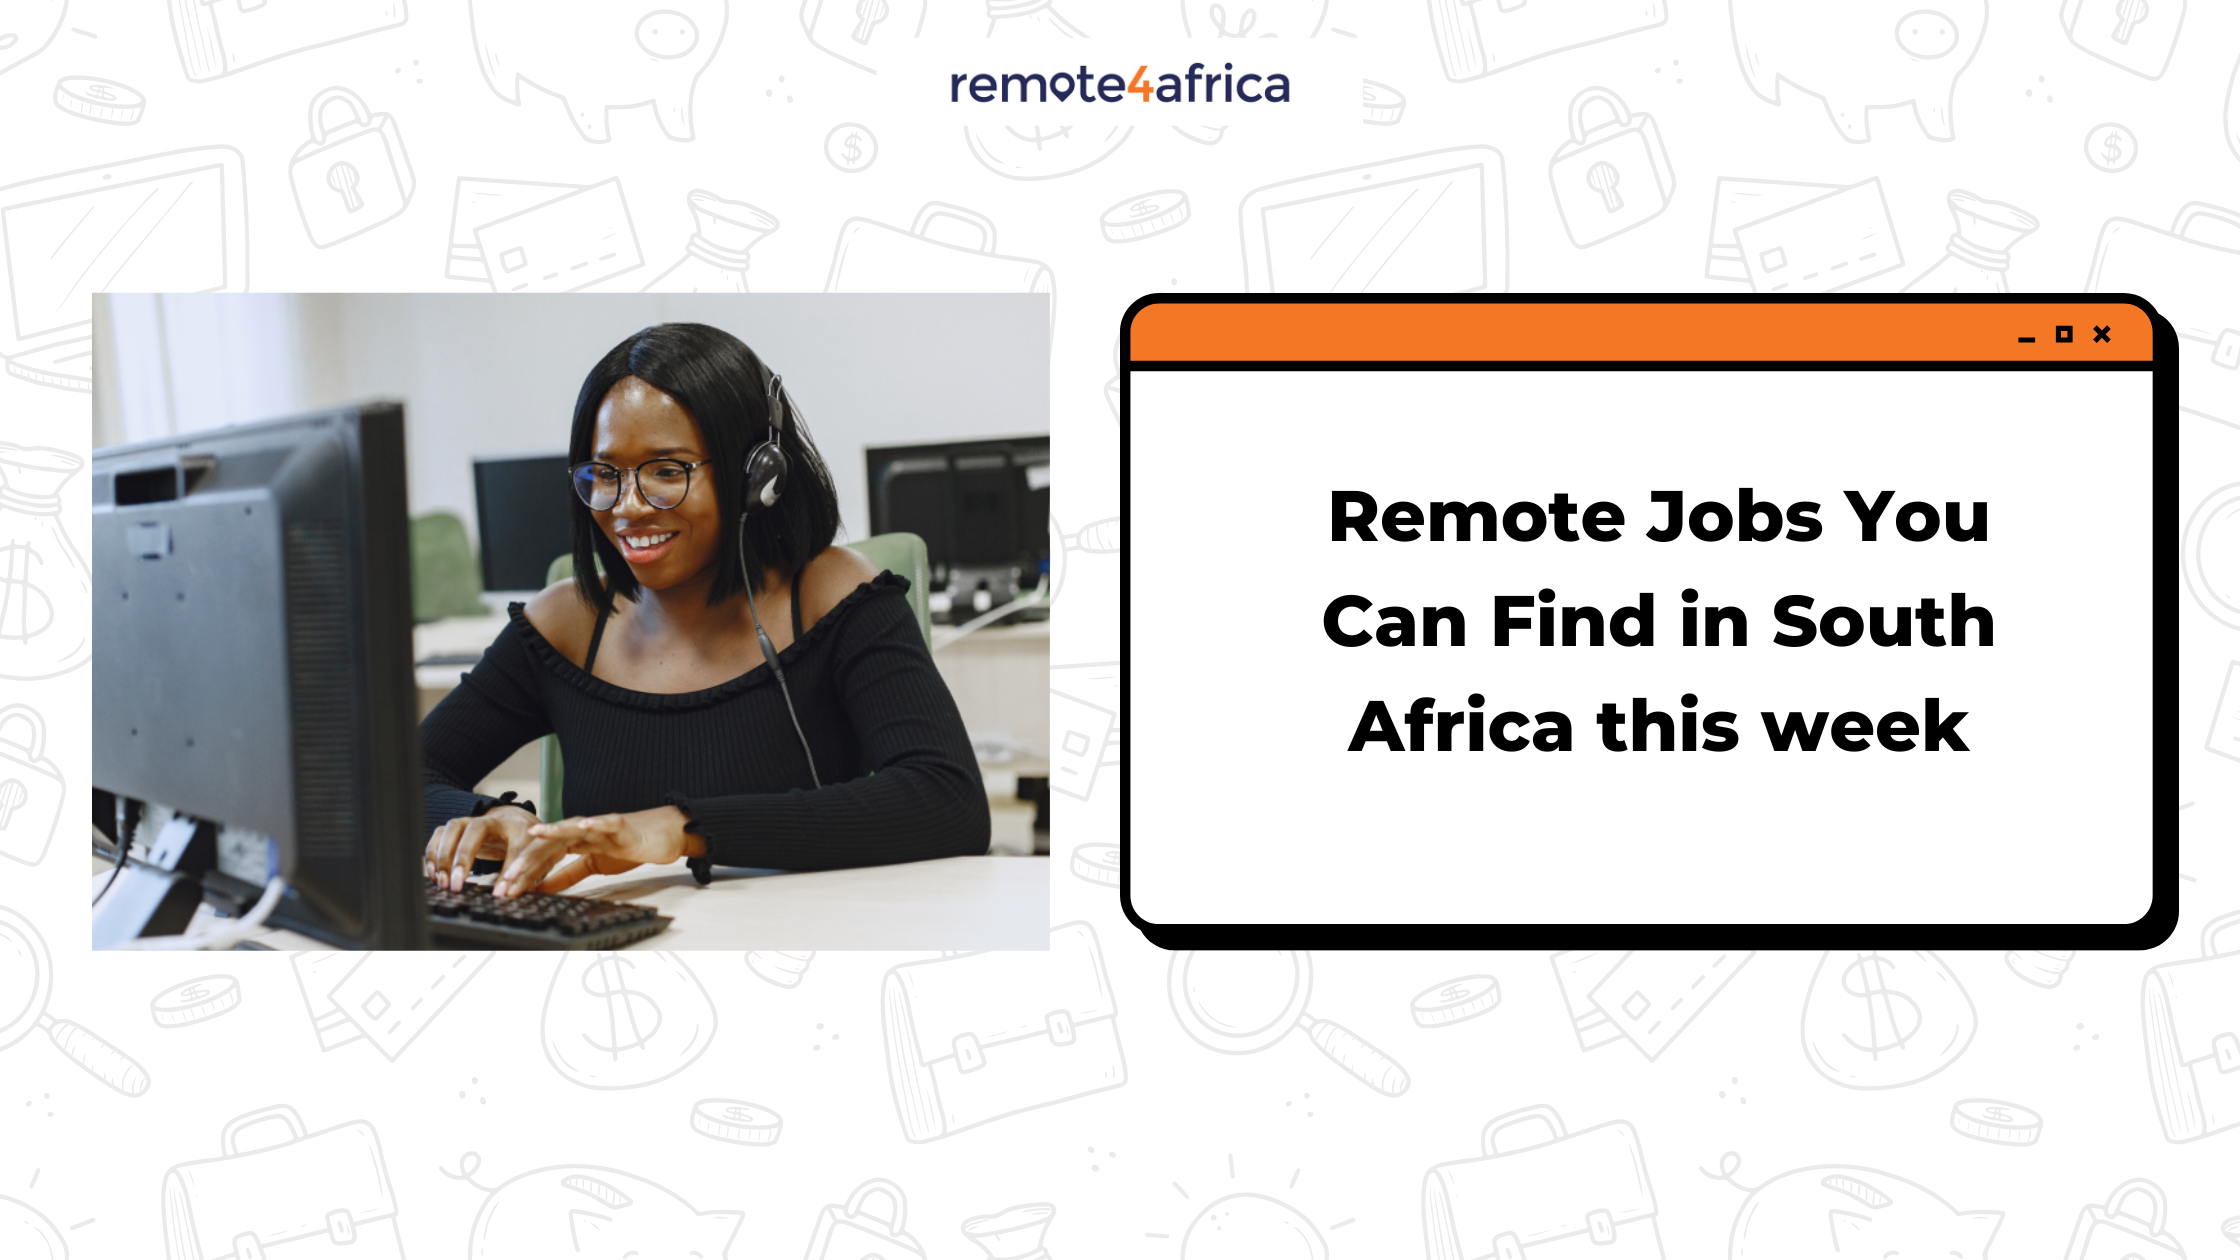 Remote Jobs You Can Find in South Africa this week